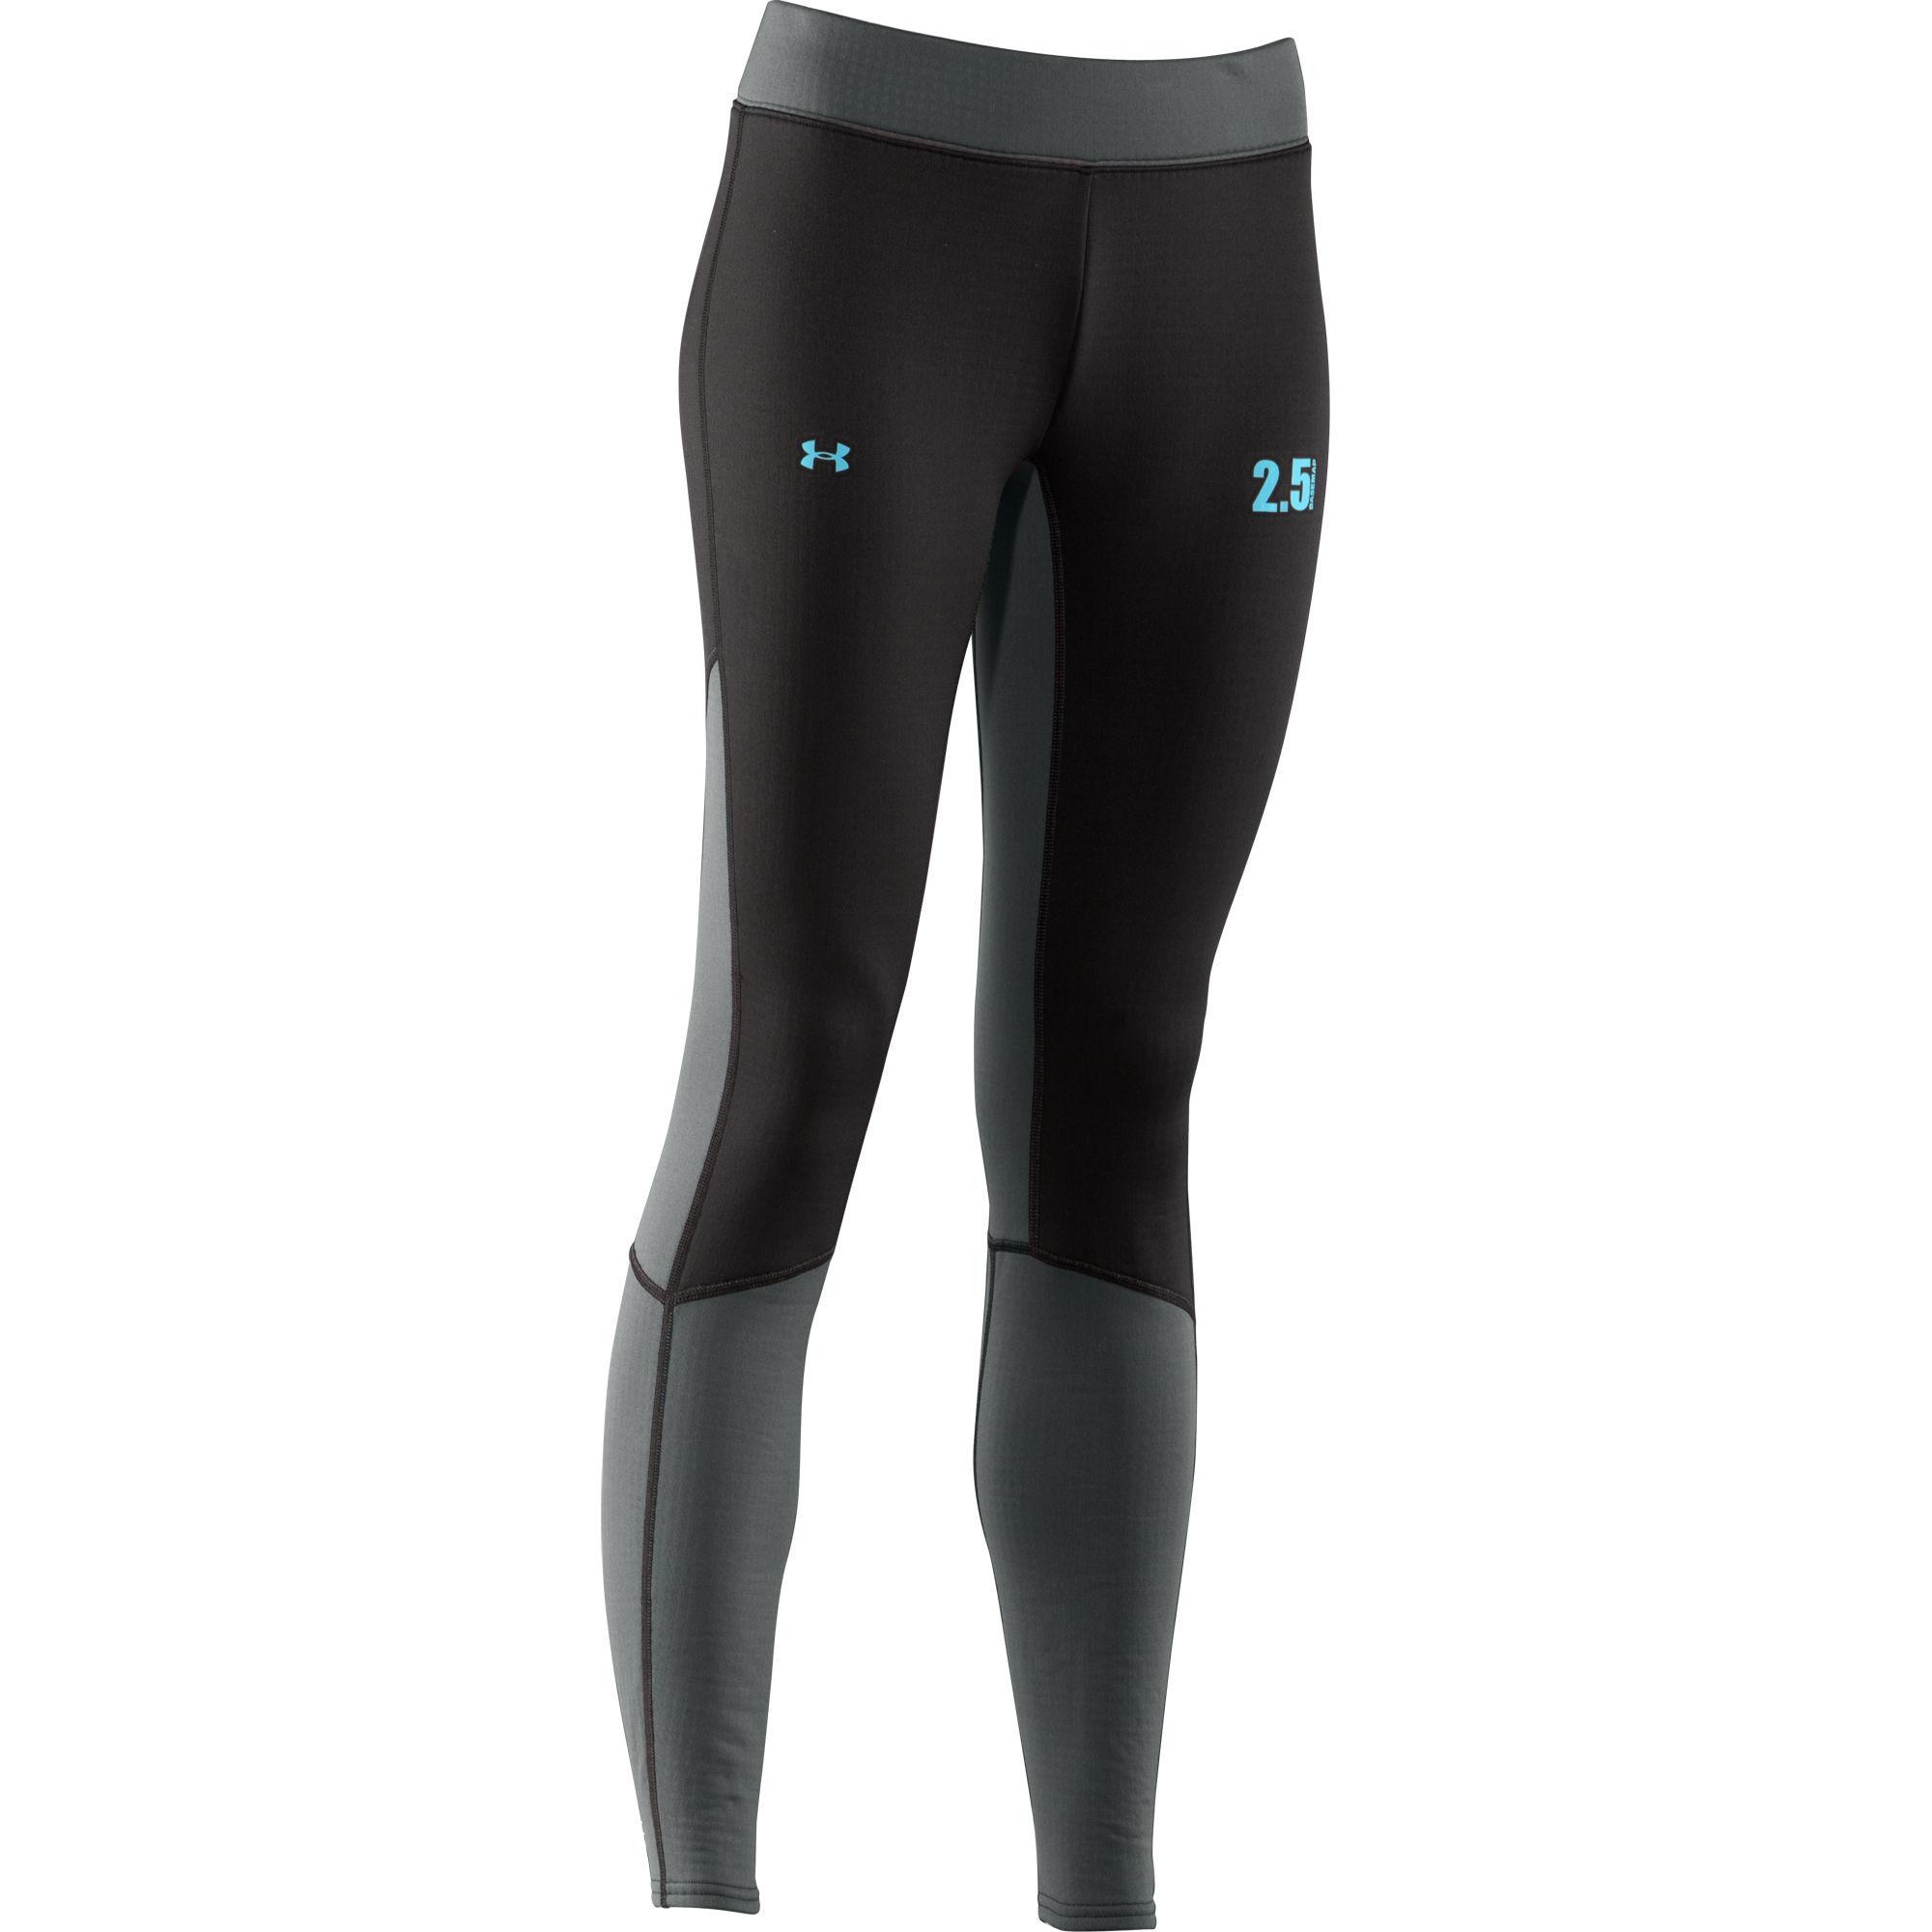 Foto Mallas largas para mujer Under Armour - Base Map 2.5 - Extra Large foto 426594